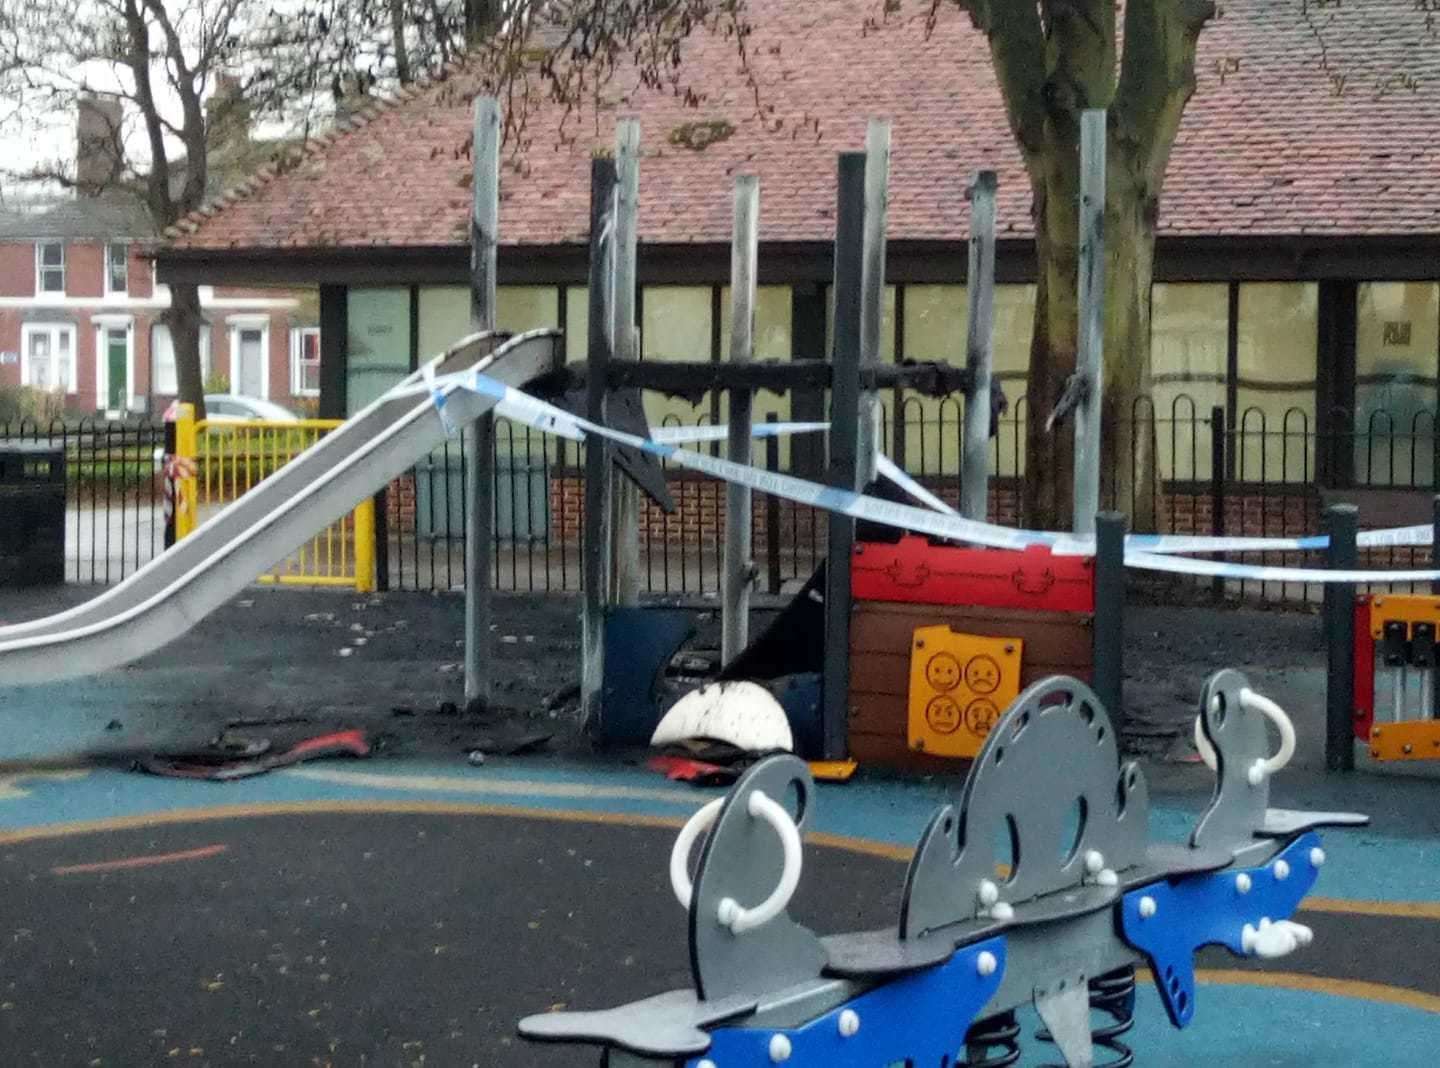 A play area in Faversham has been targeted by arsonists. Picture: Jo Foad